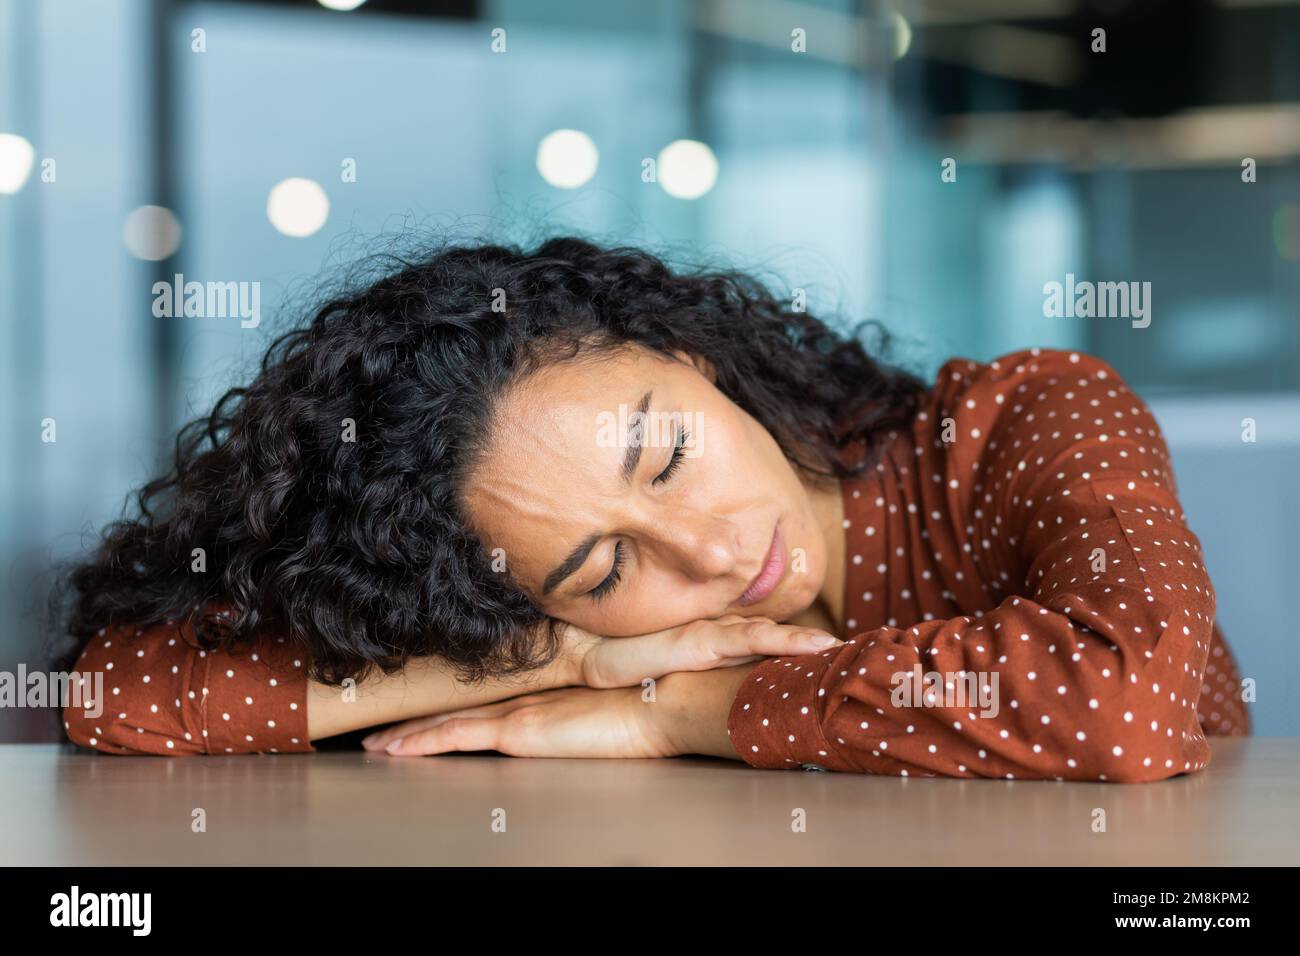 Beautiful tired hispanic woman sleeping on desk, close-up business woman with closed eyes napping inside office near laptop. Stock Photo